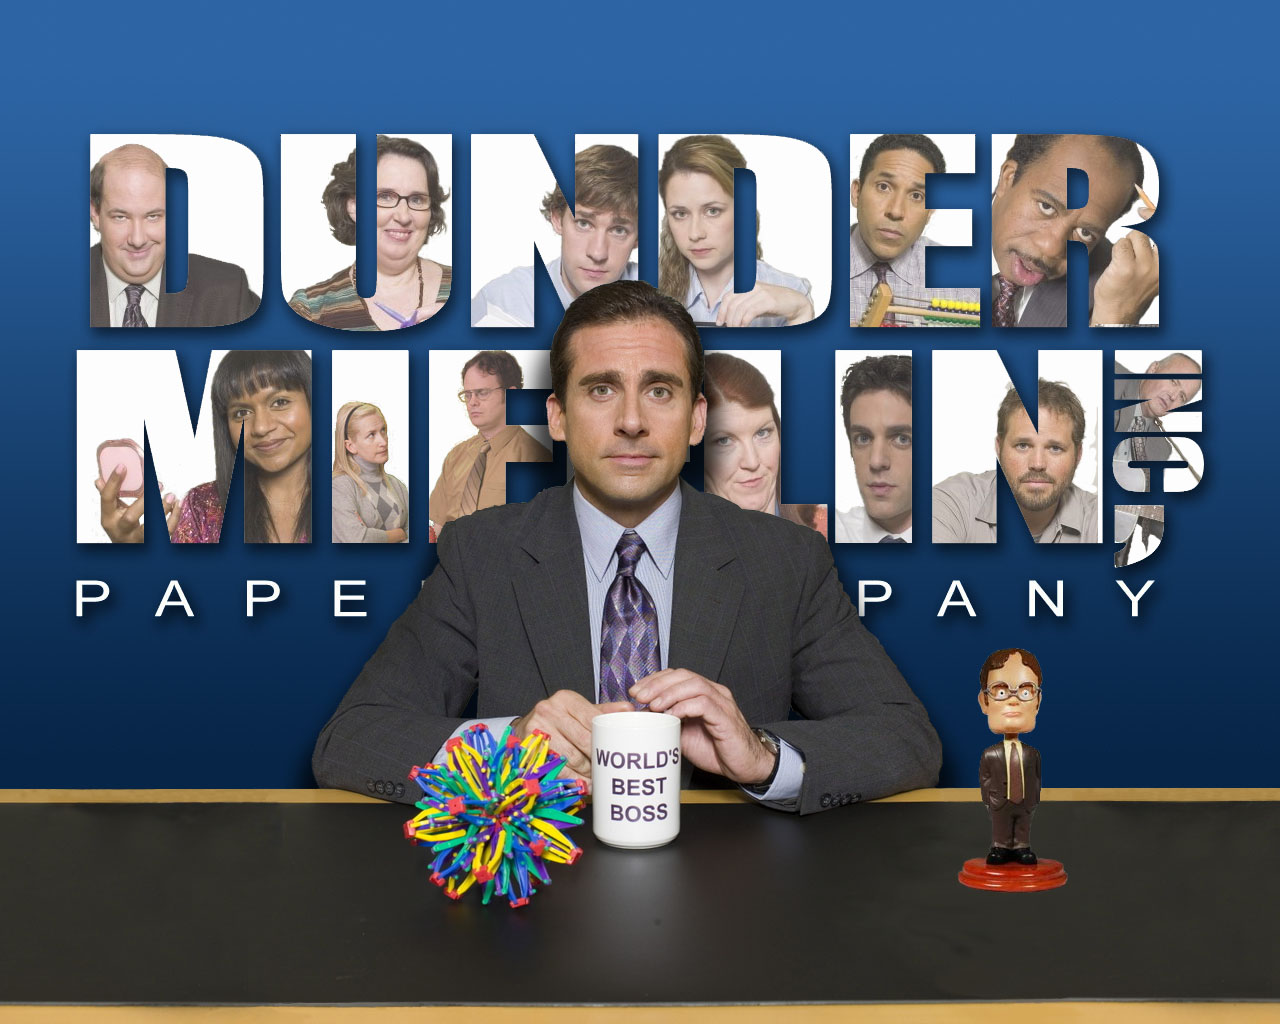 Amazing The Office (US) Pictures & Backgrounds